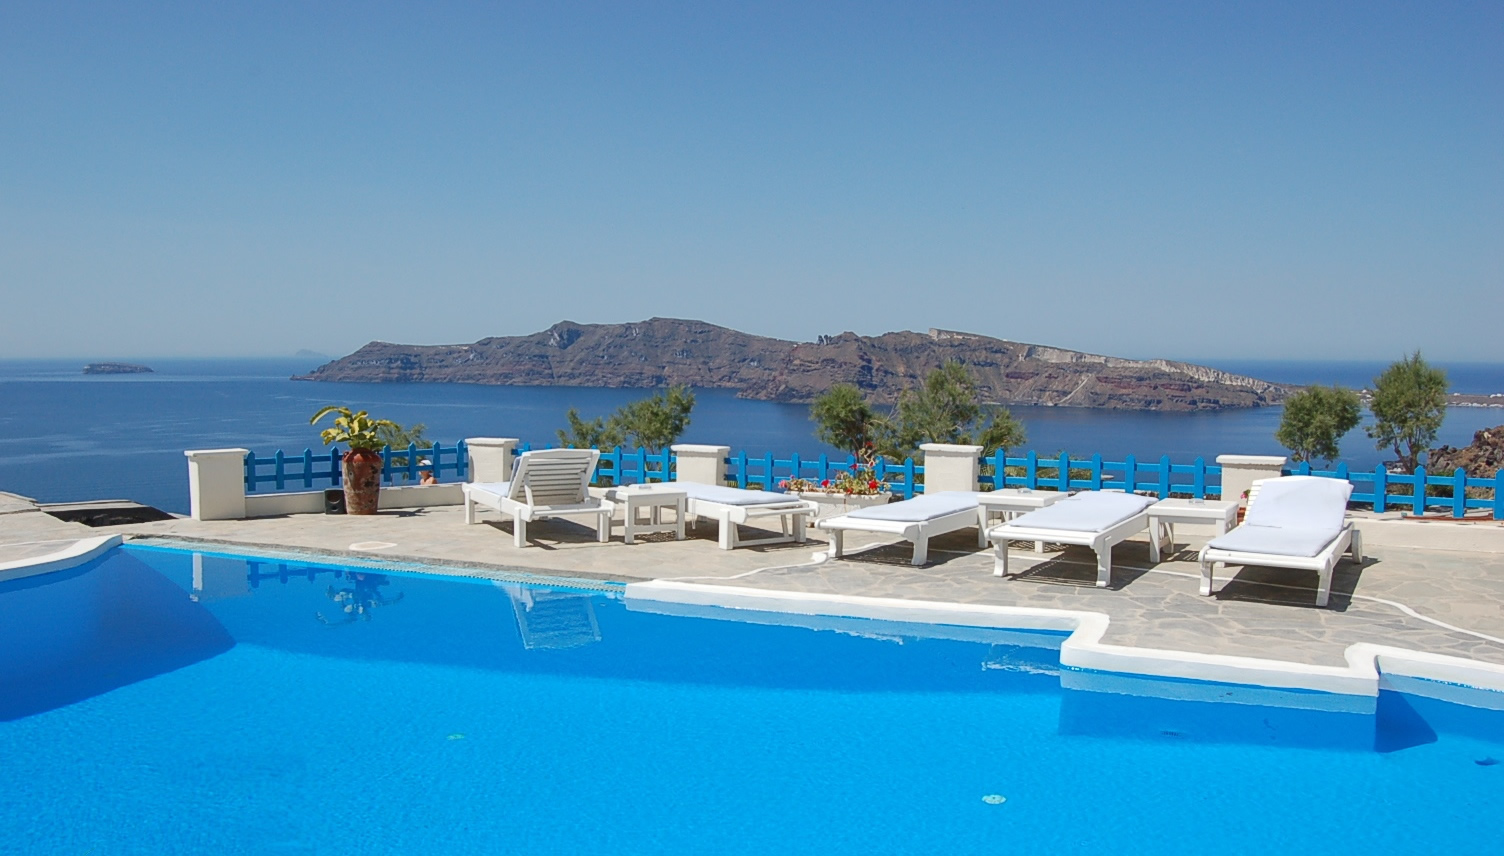 Pool Area Hotels Appealing Pool Area At Katikies Hotels In Oia With View Of Ocean Decorated With Upholstered Loungers And Planters Interior Design Classy And Elegant White Home With Breathtaking Panoramic Sea Views